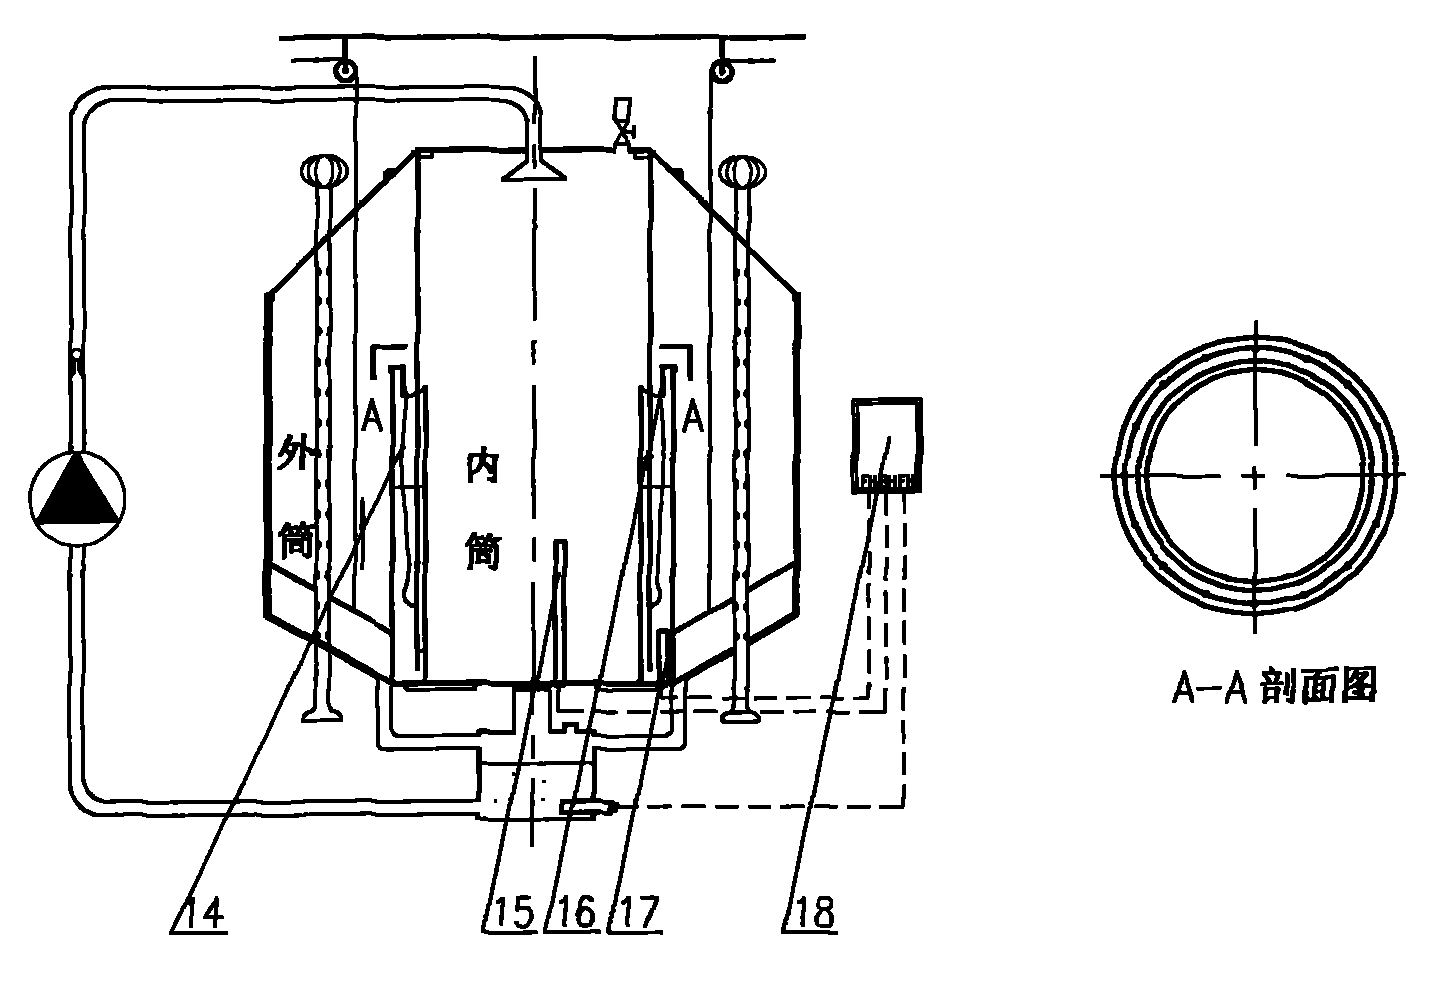 Automated biogas dry fermentation device